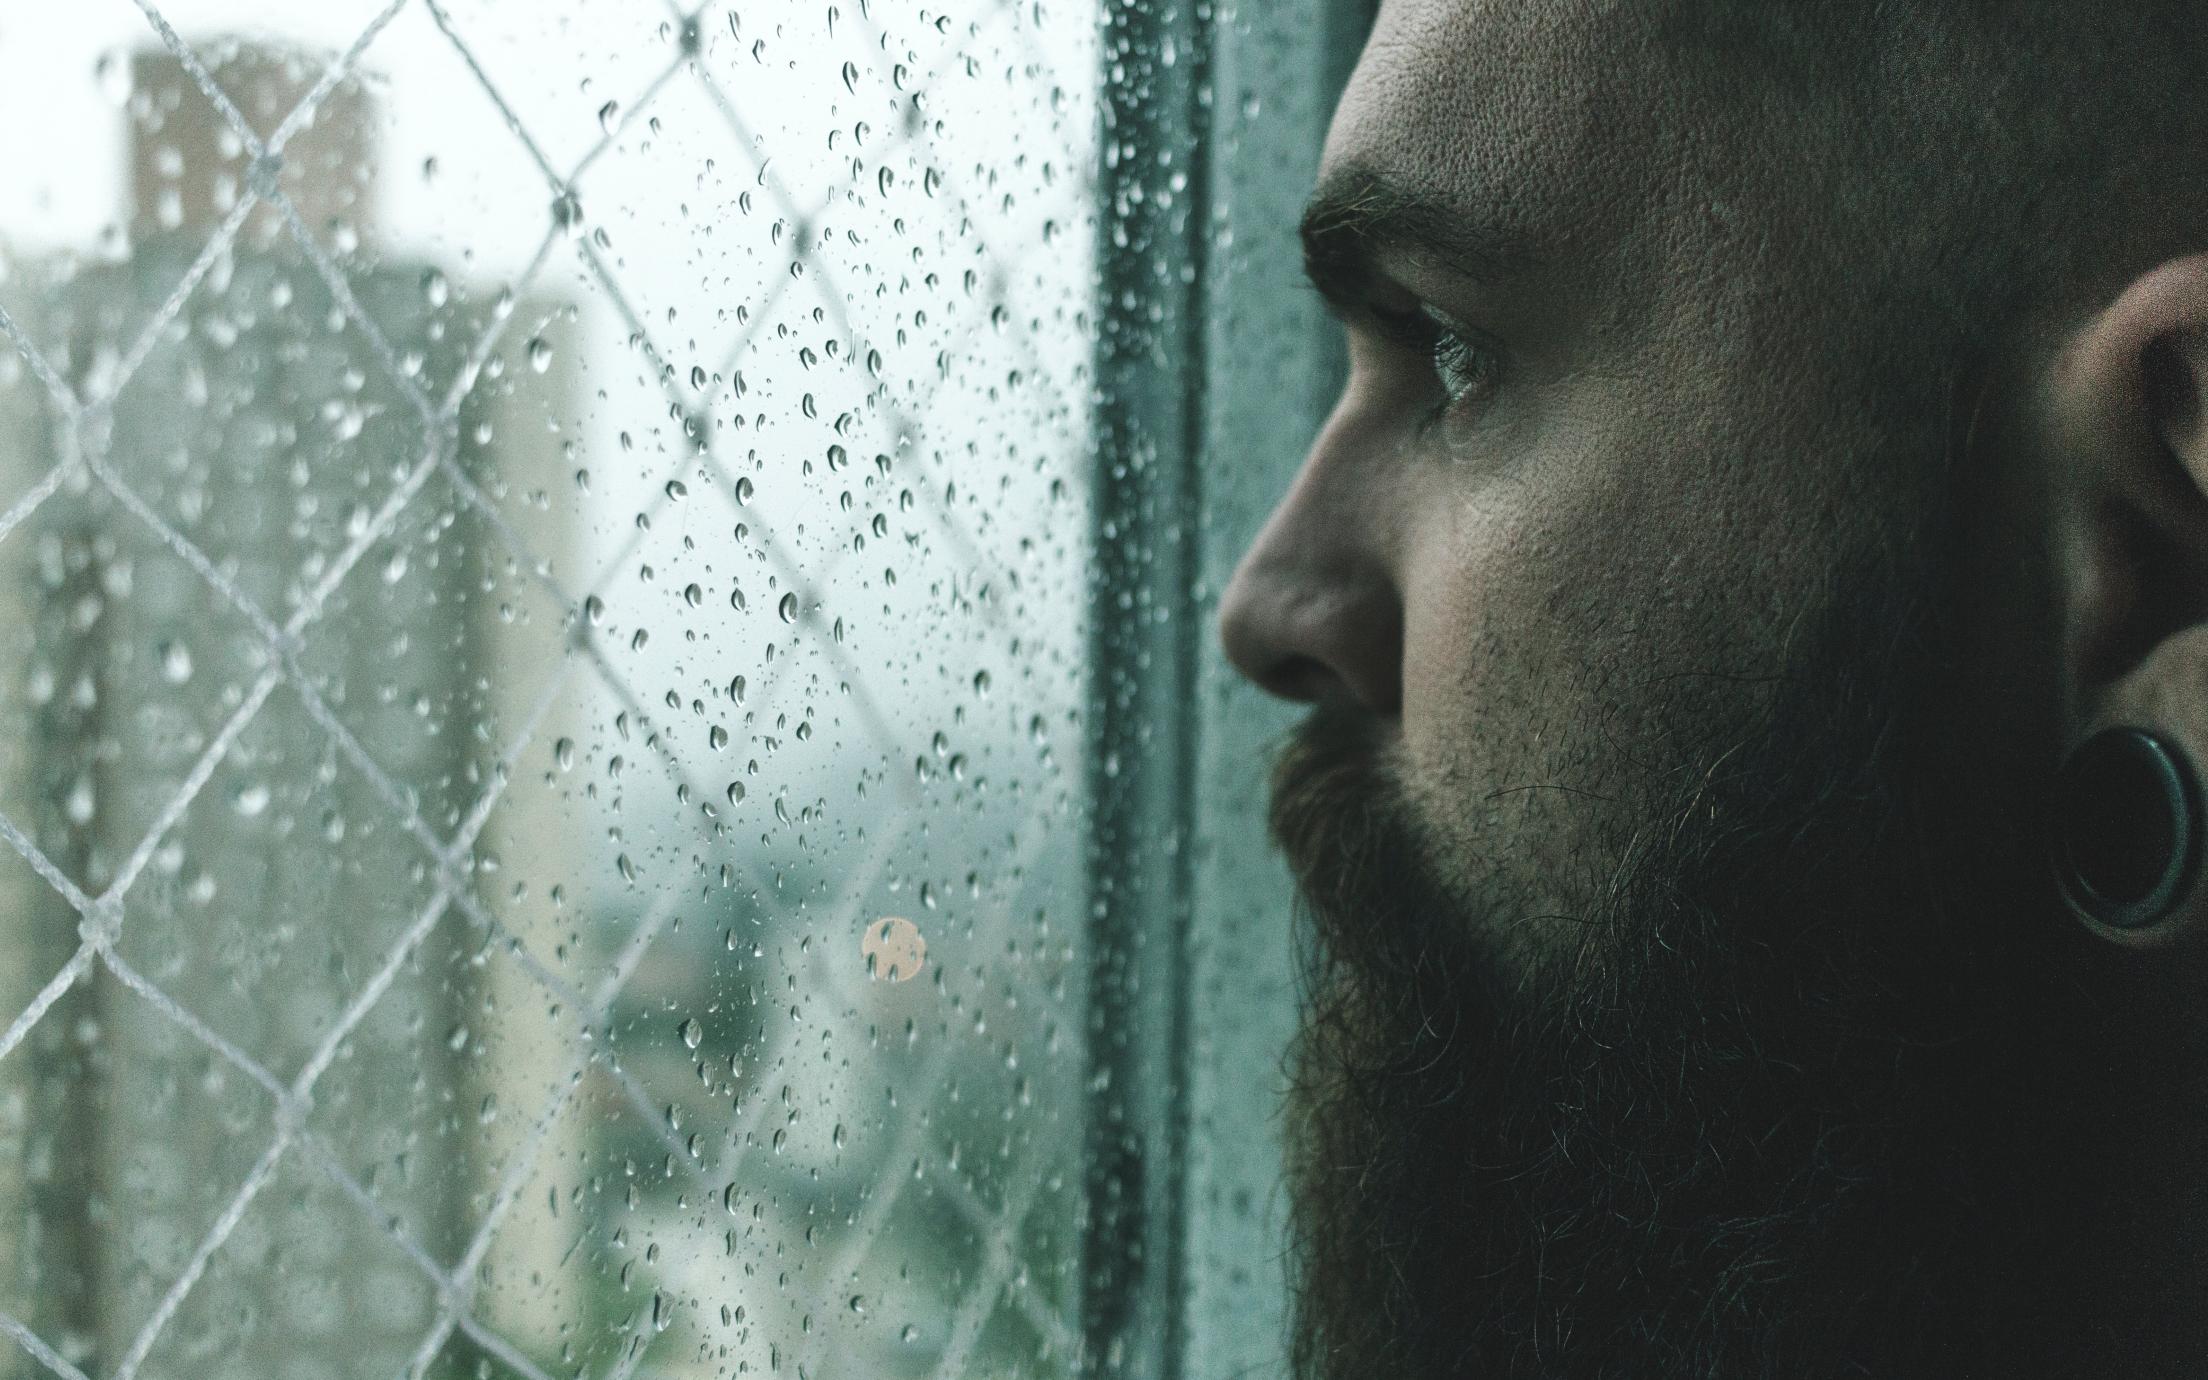 Man staring out the window at the rain